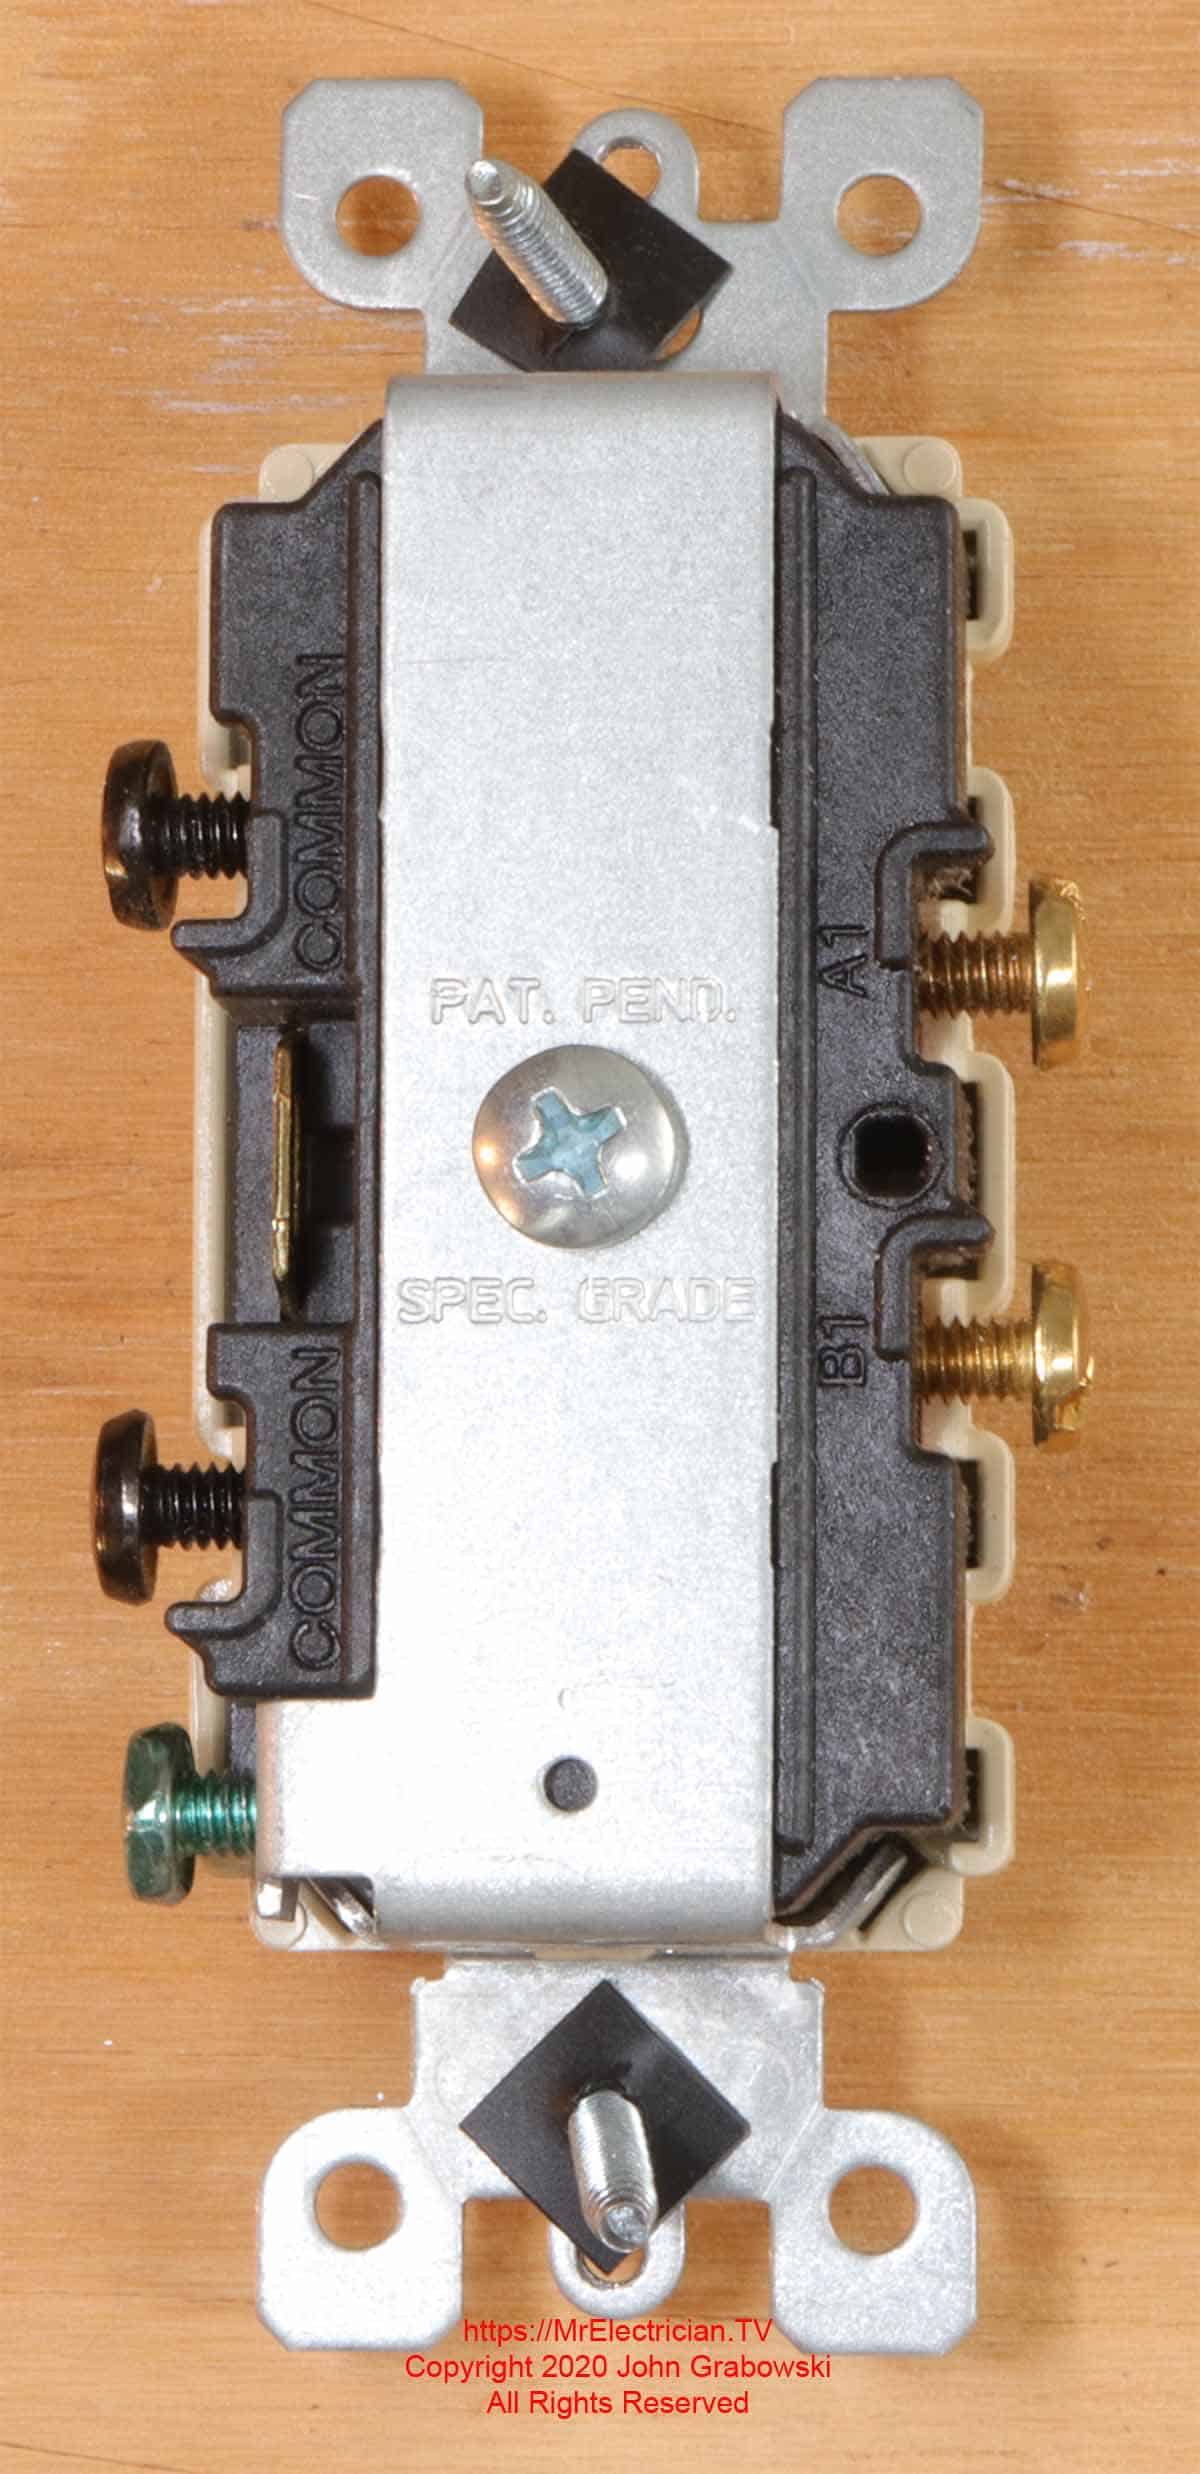 Depicted is the wiring terminals on the rear view of a combination switch device with two single pole switches